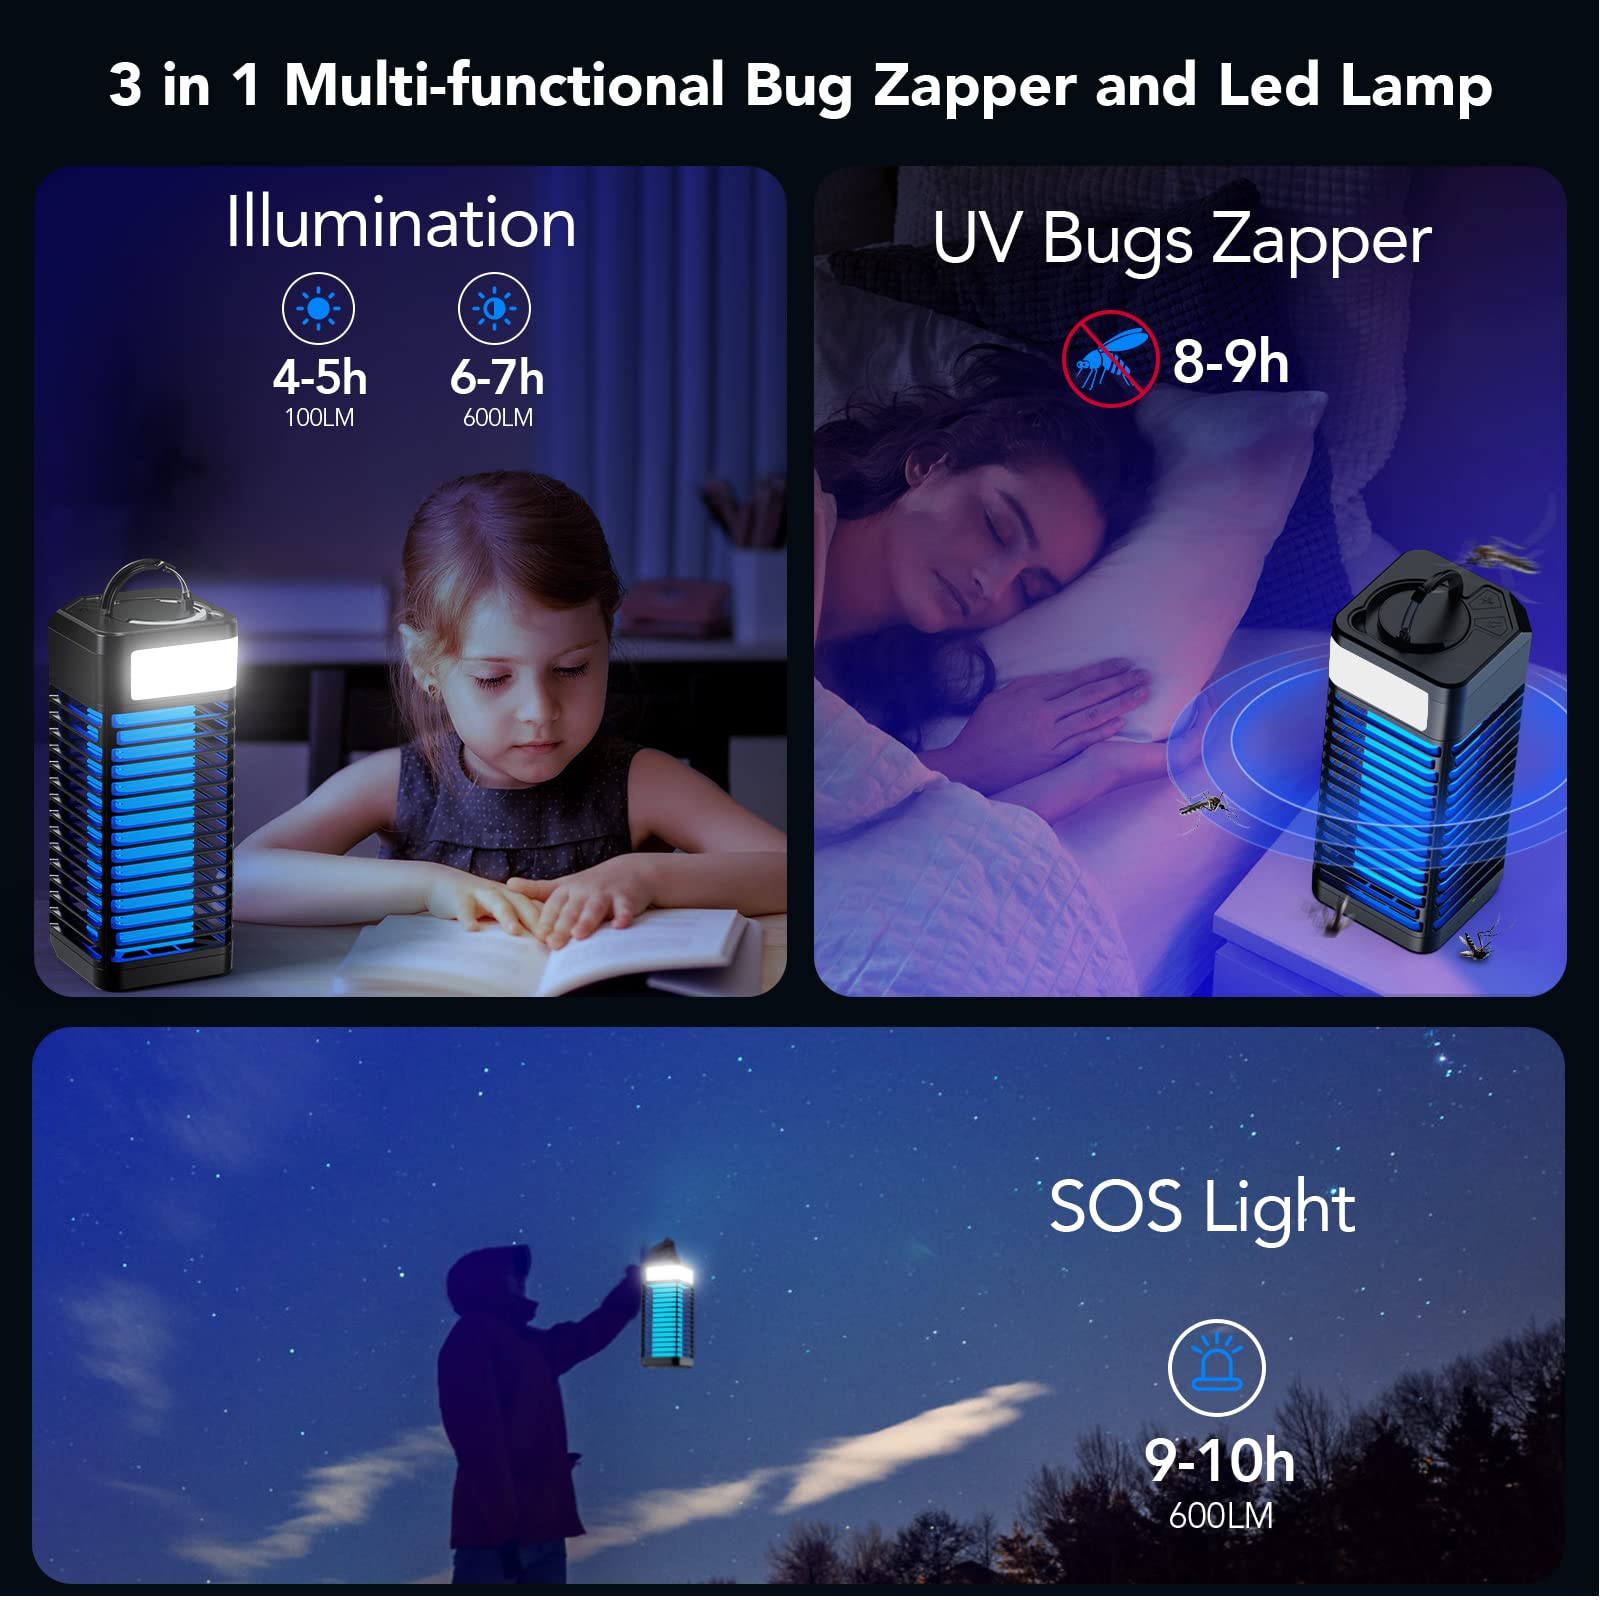 GKKOWN Bug Zapper Outdoor and Indoor, Mosquito Zapper, Fly Zapper, Electric Rechargeable Cordless Waterproof Mosquito Trap, Mosquito Killer Lamp for Home, Patio, Camping and RV, USB Battery Powered